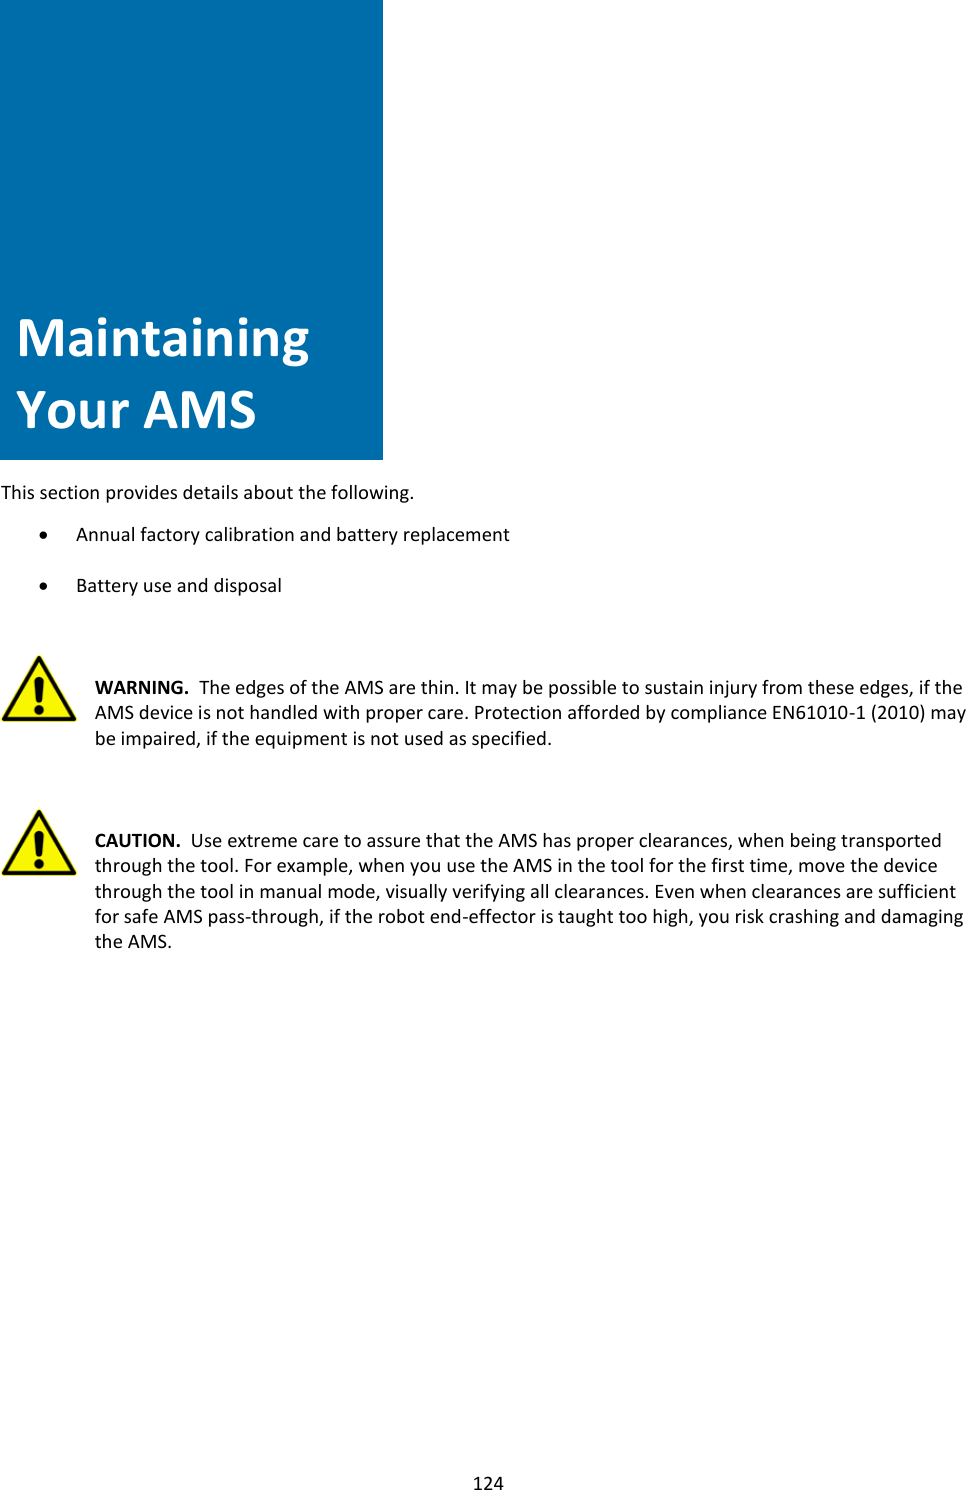   124                 Maintaining Your AMS   This section provides details about the following.  • Annual factory calibration and battery replacement  • Battery use and disposal    WARNING.  The edges of the AMS are thin. It may be possible to sustain injury from these edges, if the AMS device is not handled with proper care. Protection afforded by compliance EN61010-1 (2010) may be impaired, if the equipment is not used as specified.    CAUTION.  Use extreme care to assure that the AMS has proper clearances, when being transported through the tool. For example, when you use the AMS in the tool for the first time, move the device through the tool in manual mode, visually verifying all clearances. Even when clearances are sufficient for safe AMS pass-through, if the robot end-effector is taught too high, you risk crashing and damaging the AMS.                    Maintaining Your AMS 